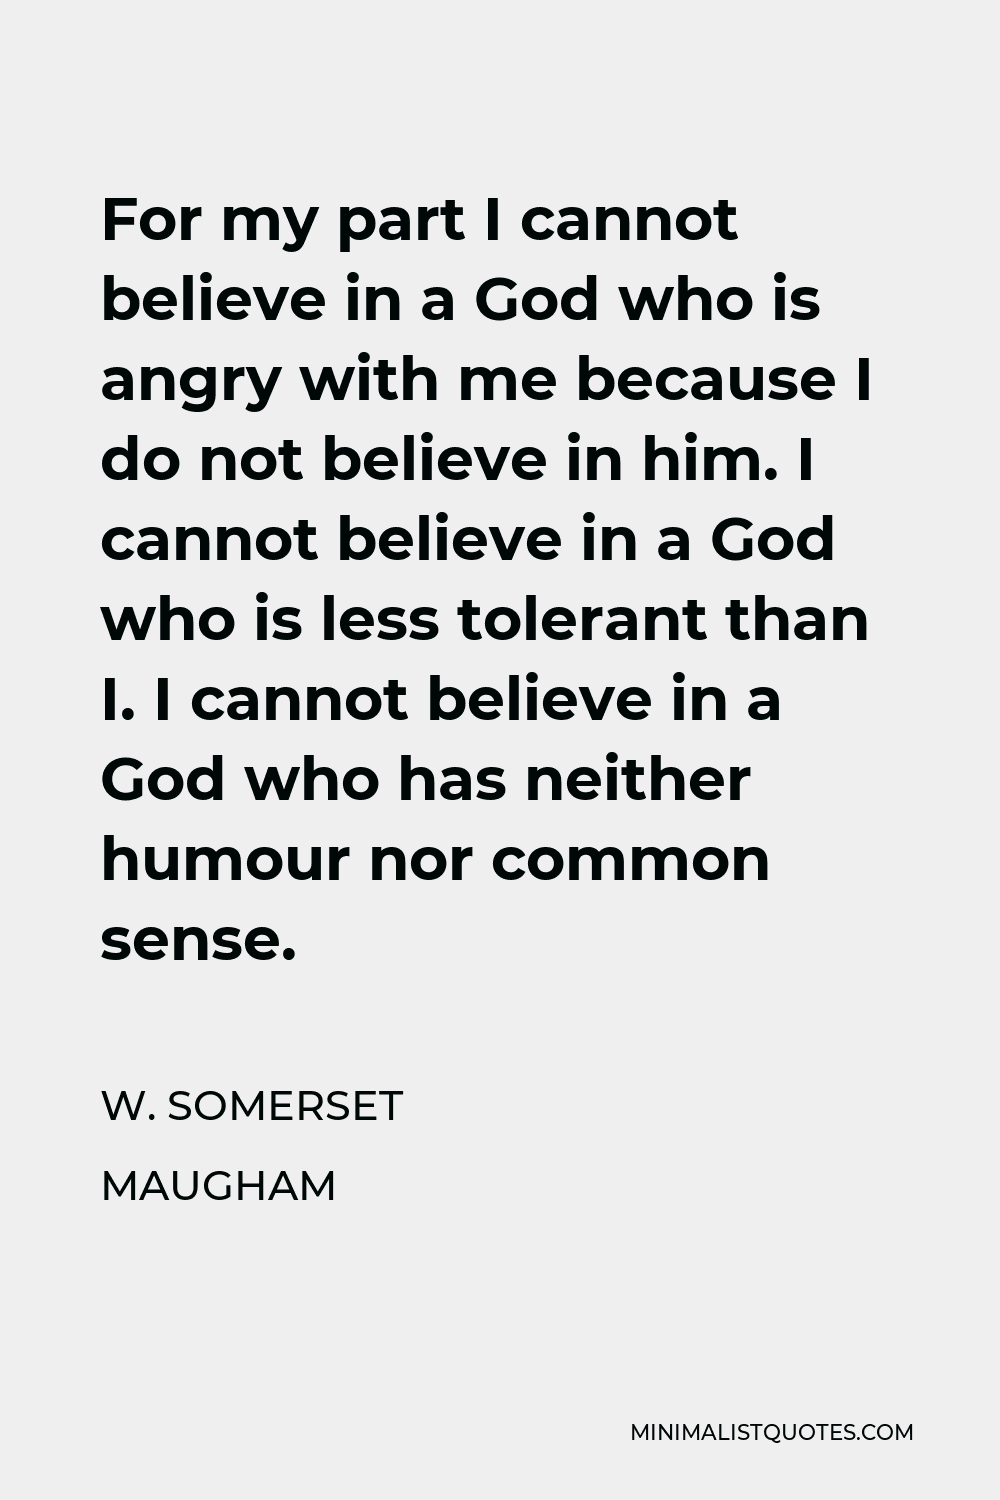 W. Somerset Maugham Quote - For my part I cannot believe in a God who is angry with me because I do not believe in him. I cannot believe in a God who is less tolerant than I. I cannot believe in a God who has neither humour nor common sense.